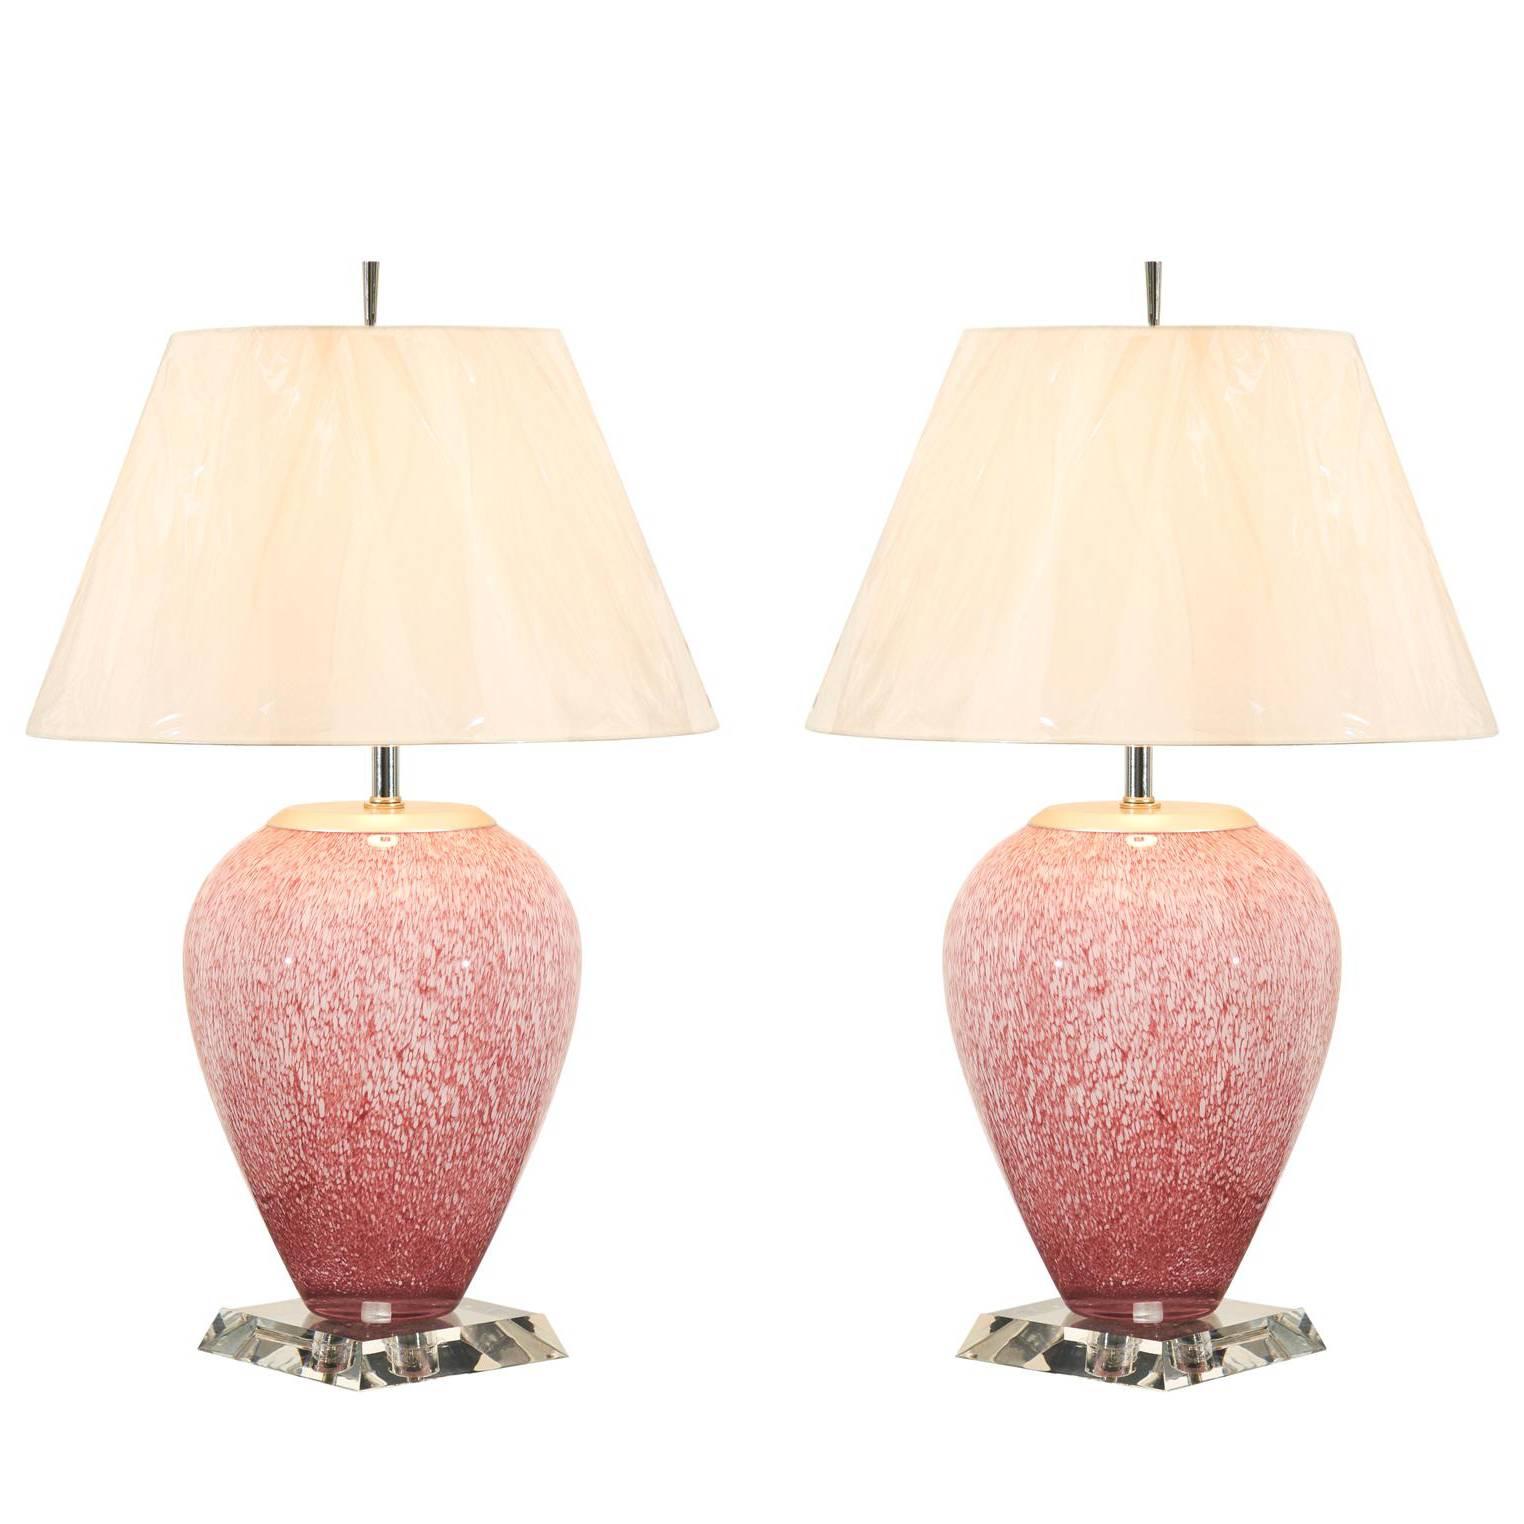 Beautiful Pair of Blown Glass Lamps with Lucite and Nickel Accents